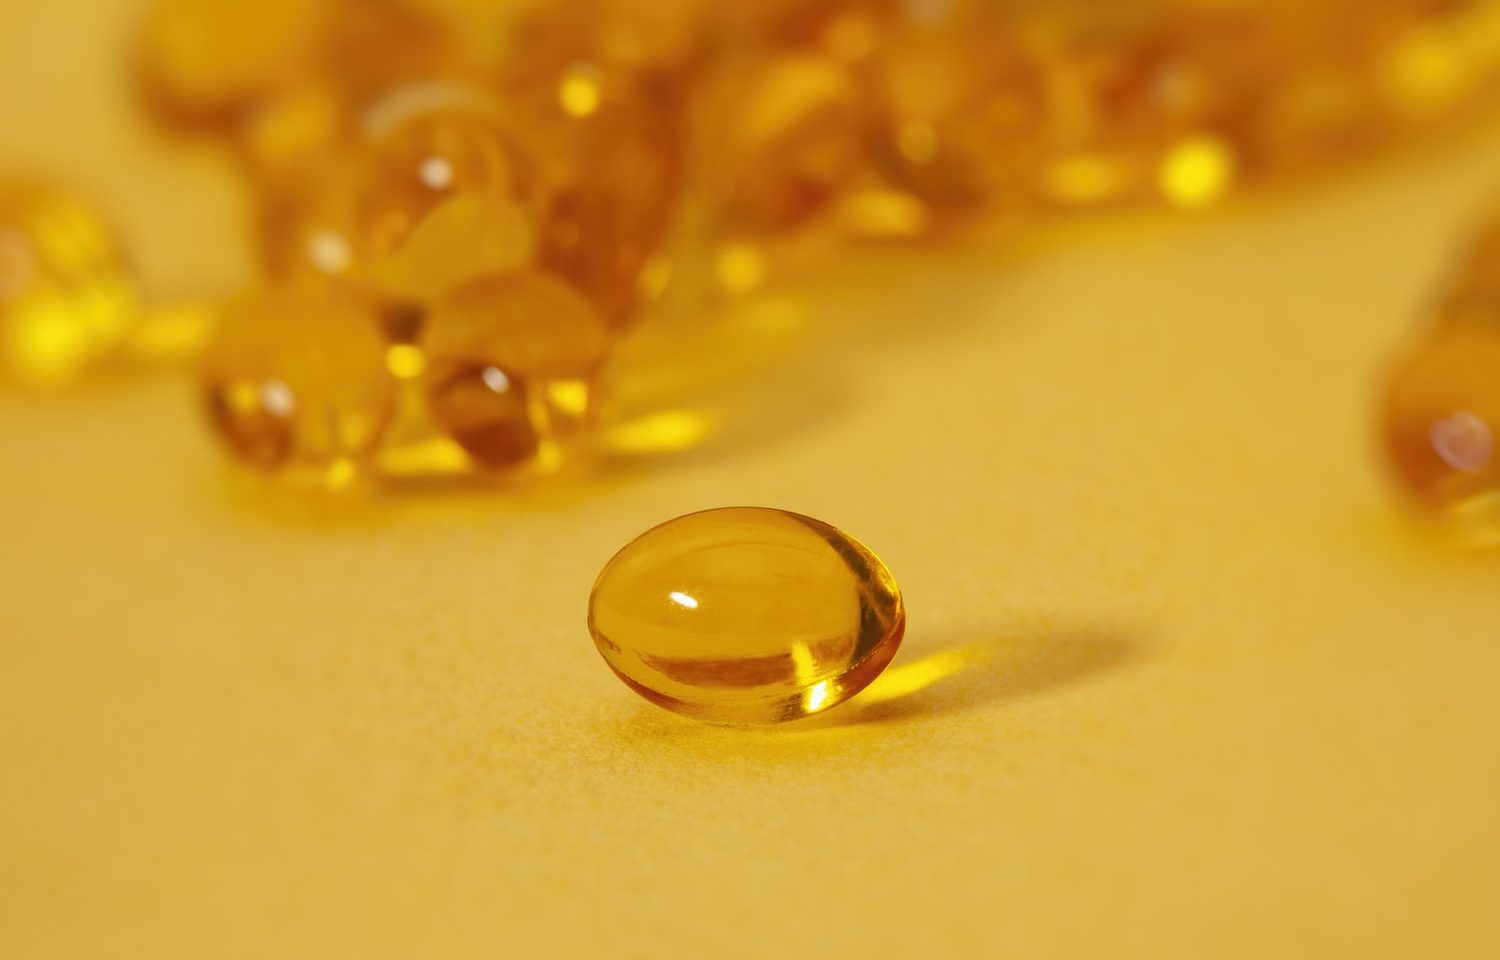 #ACTRIMS2020 – Vitamin D at High Dose Can Worsen MS, Early Study Says